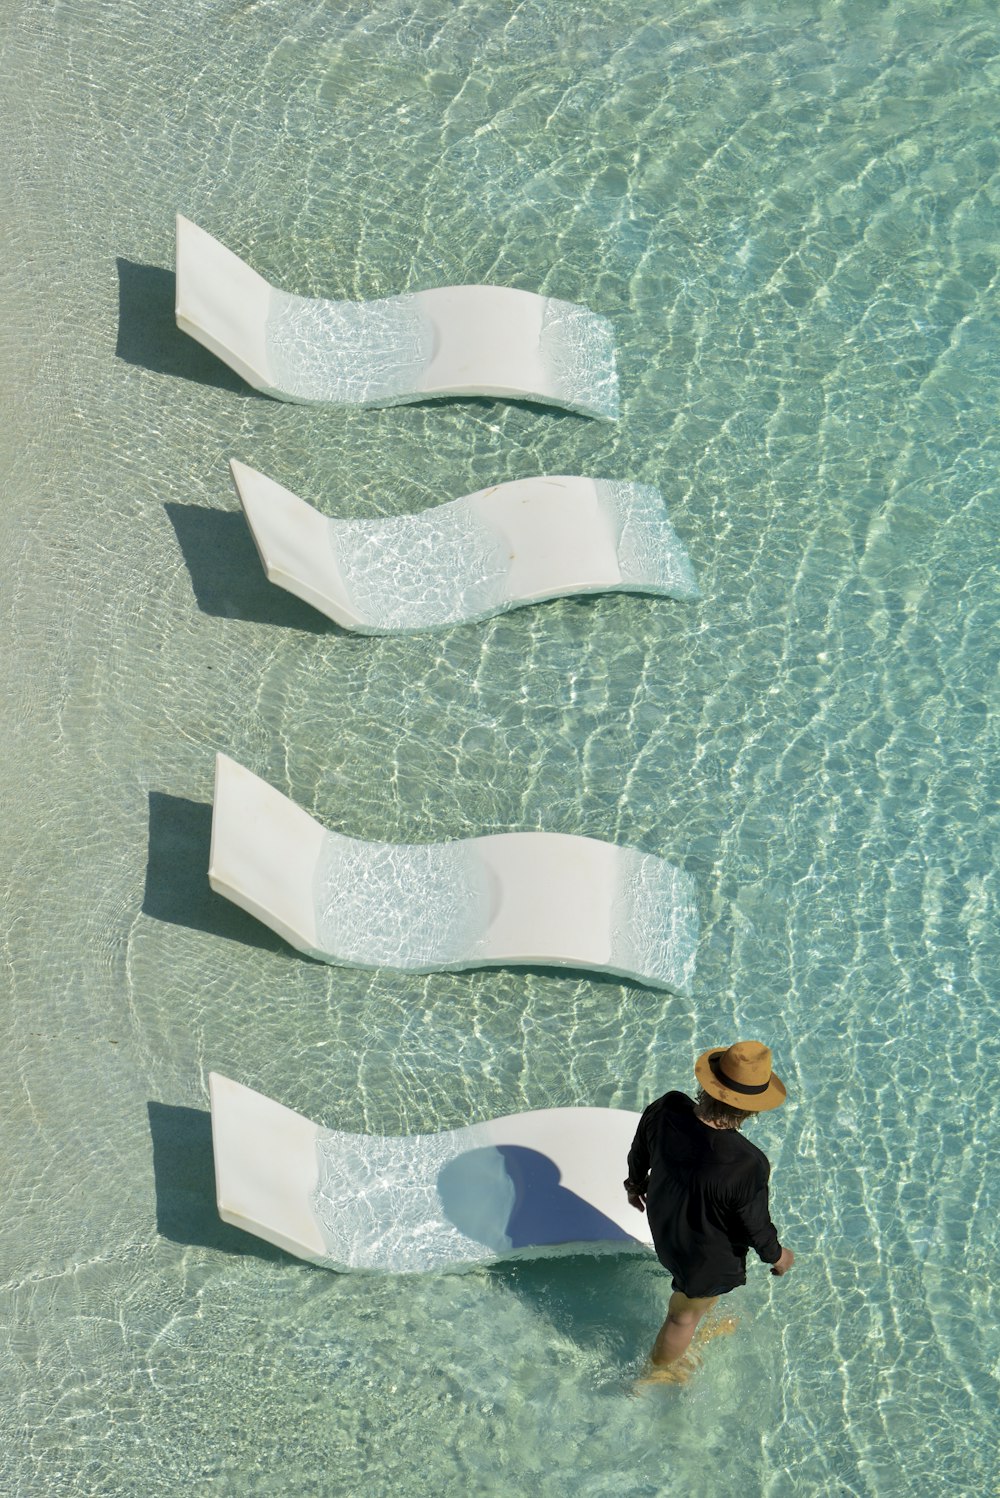 a man standing in the water next to a row of white chairs